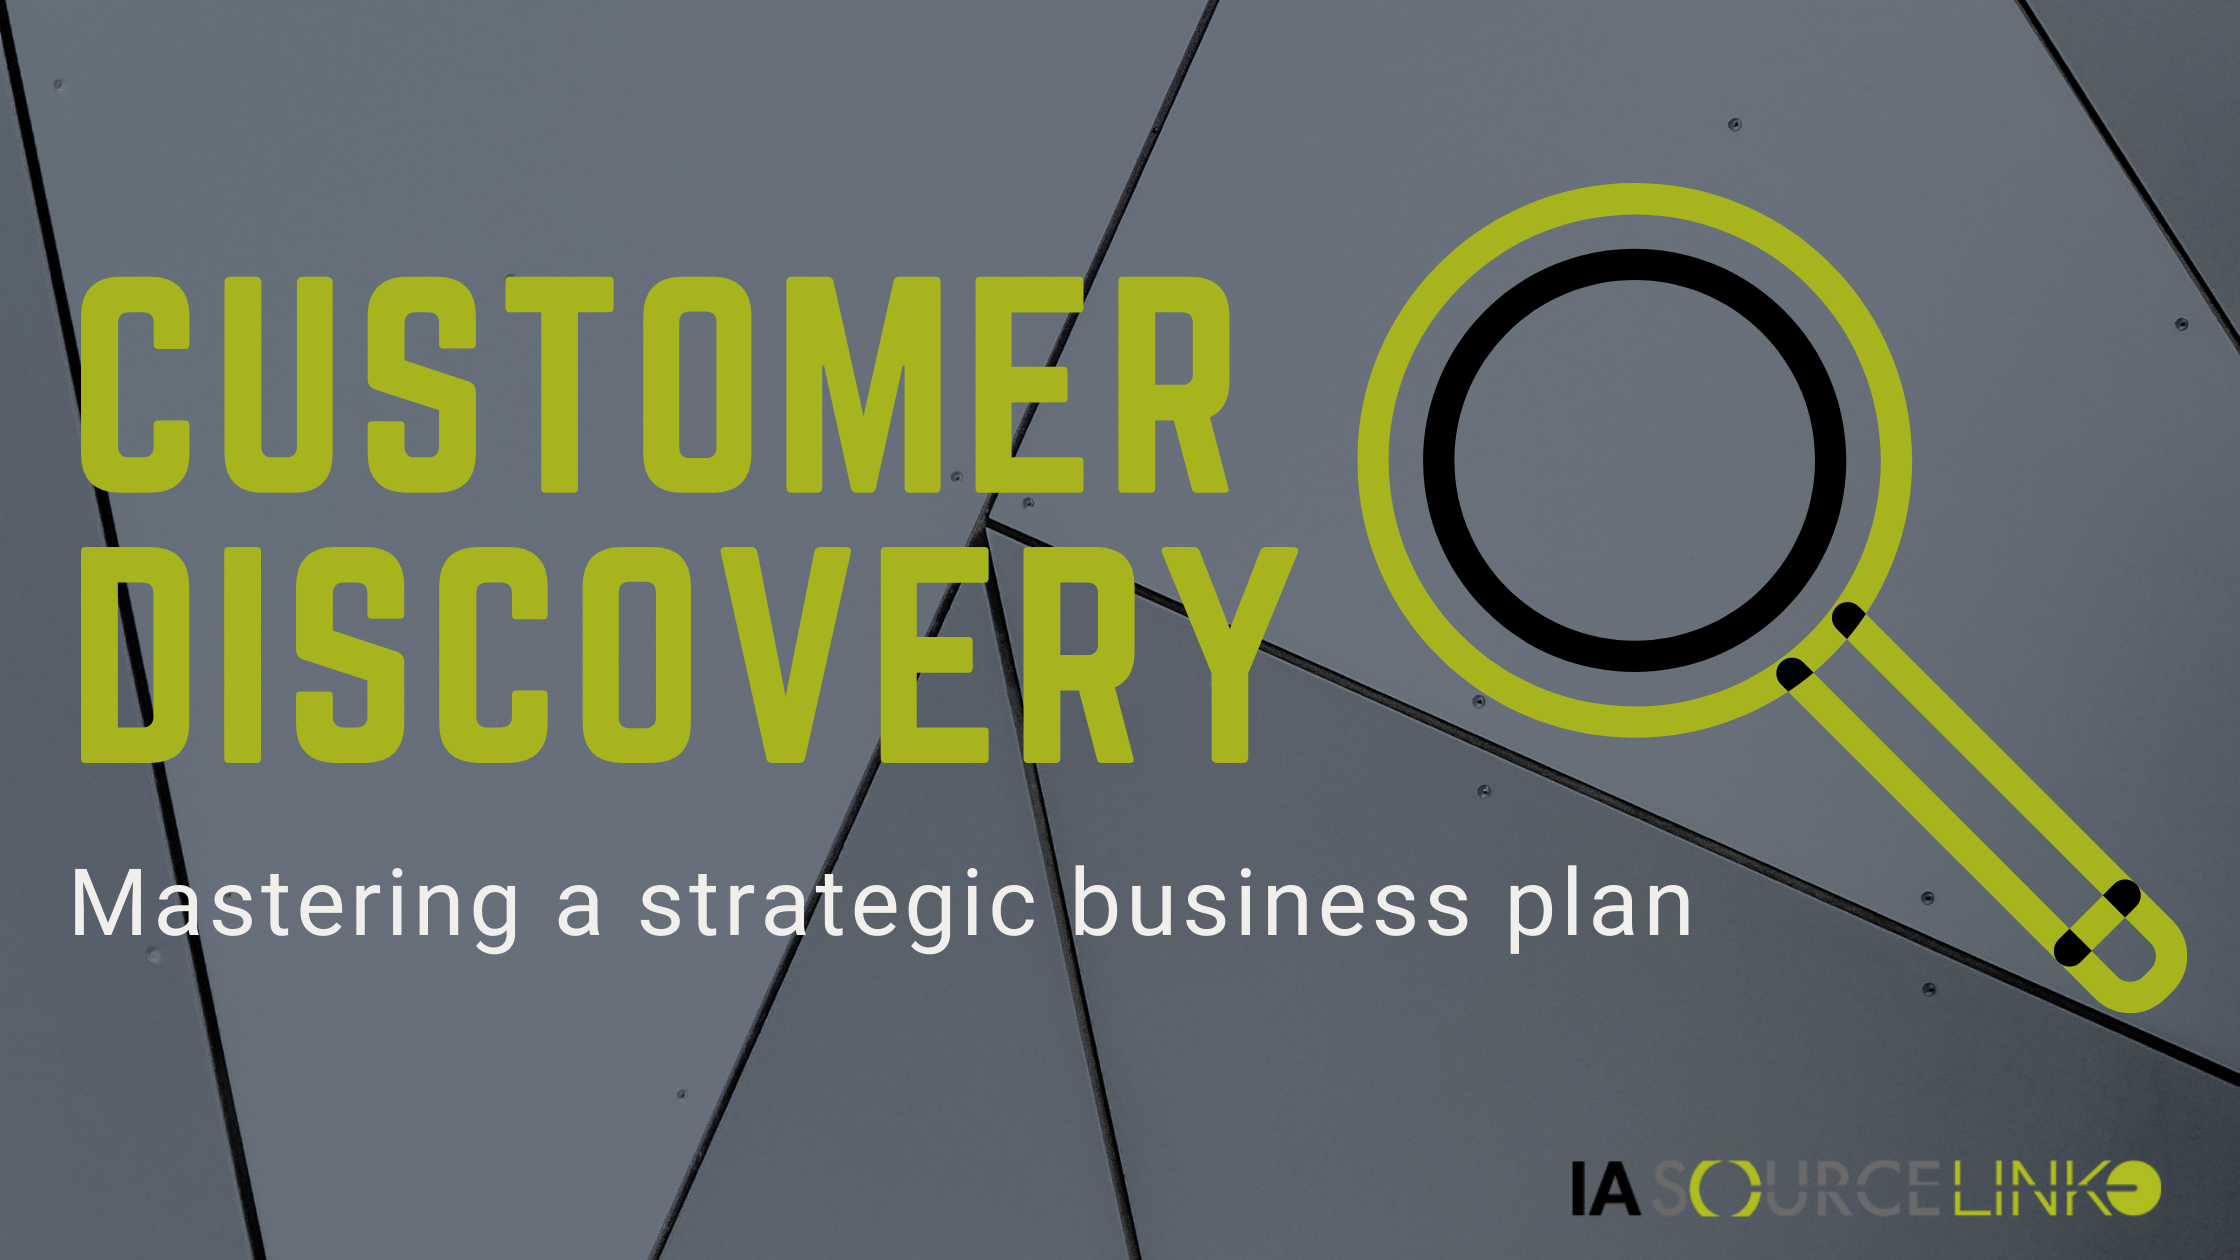 image stating customer discovery mastering a strategic business plan with a magnifying glass